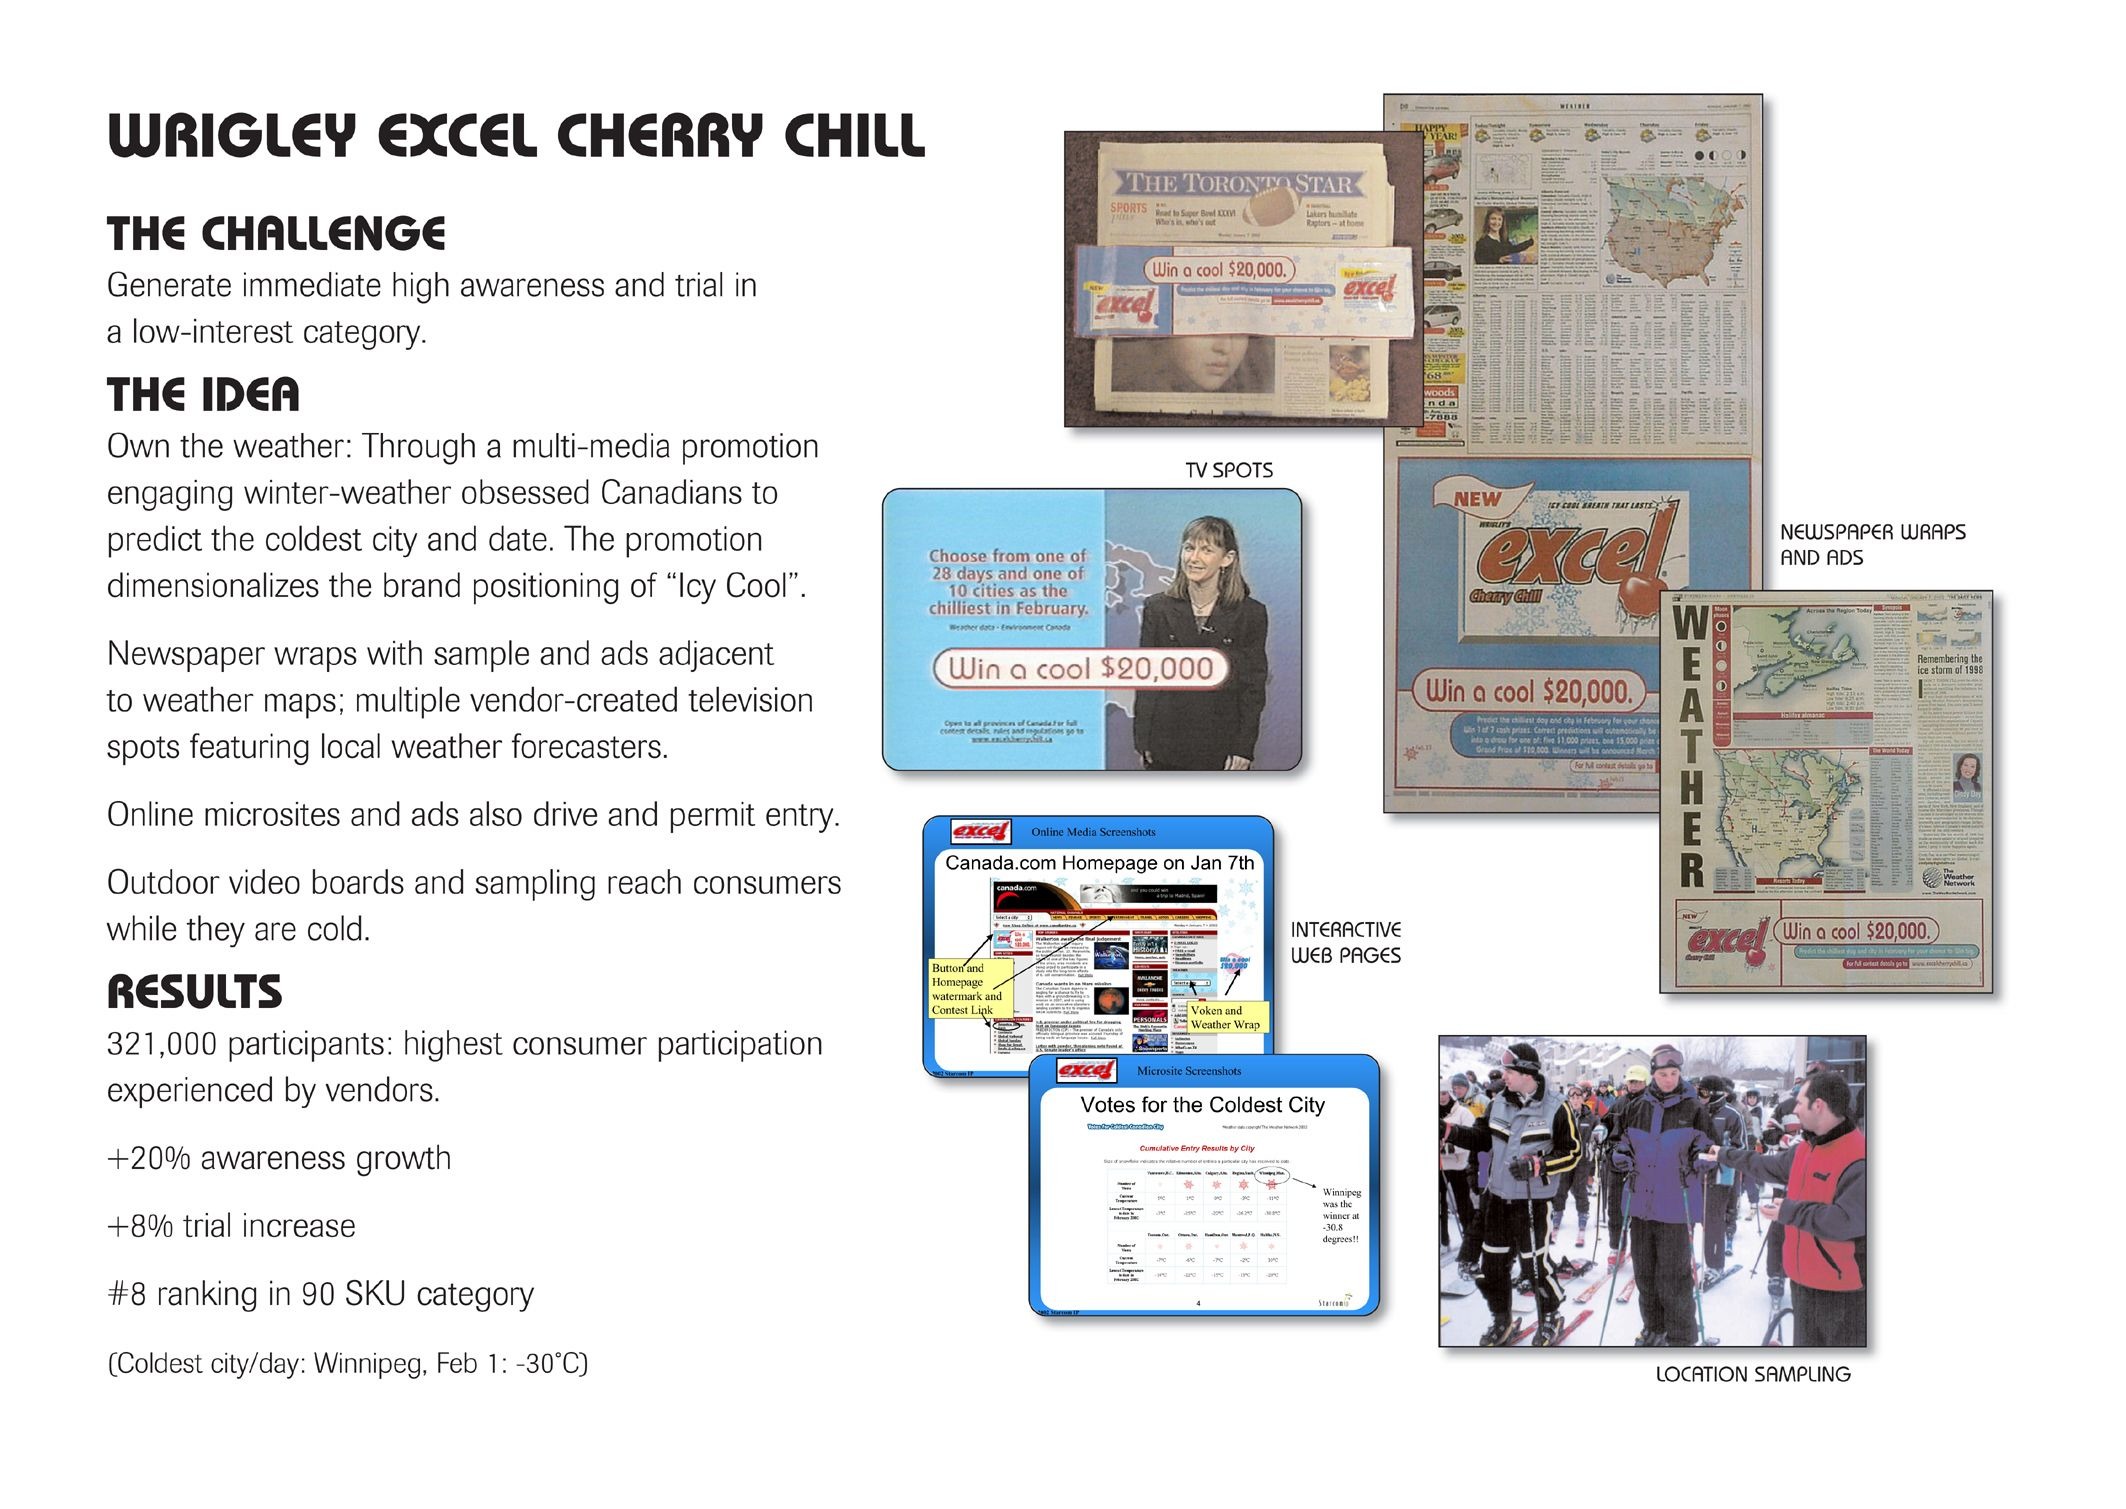 EXCEL CHERRY CHILL